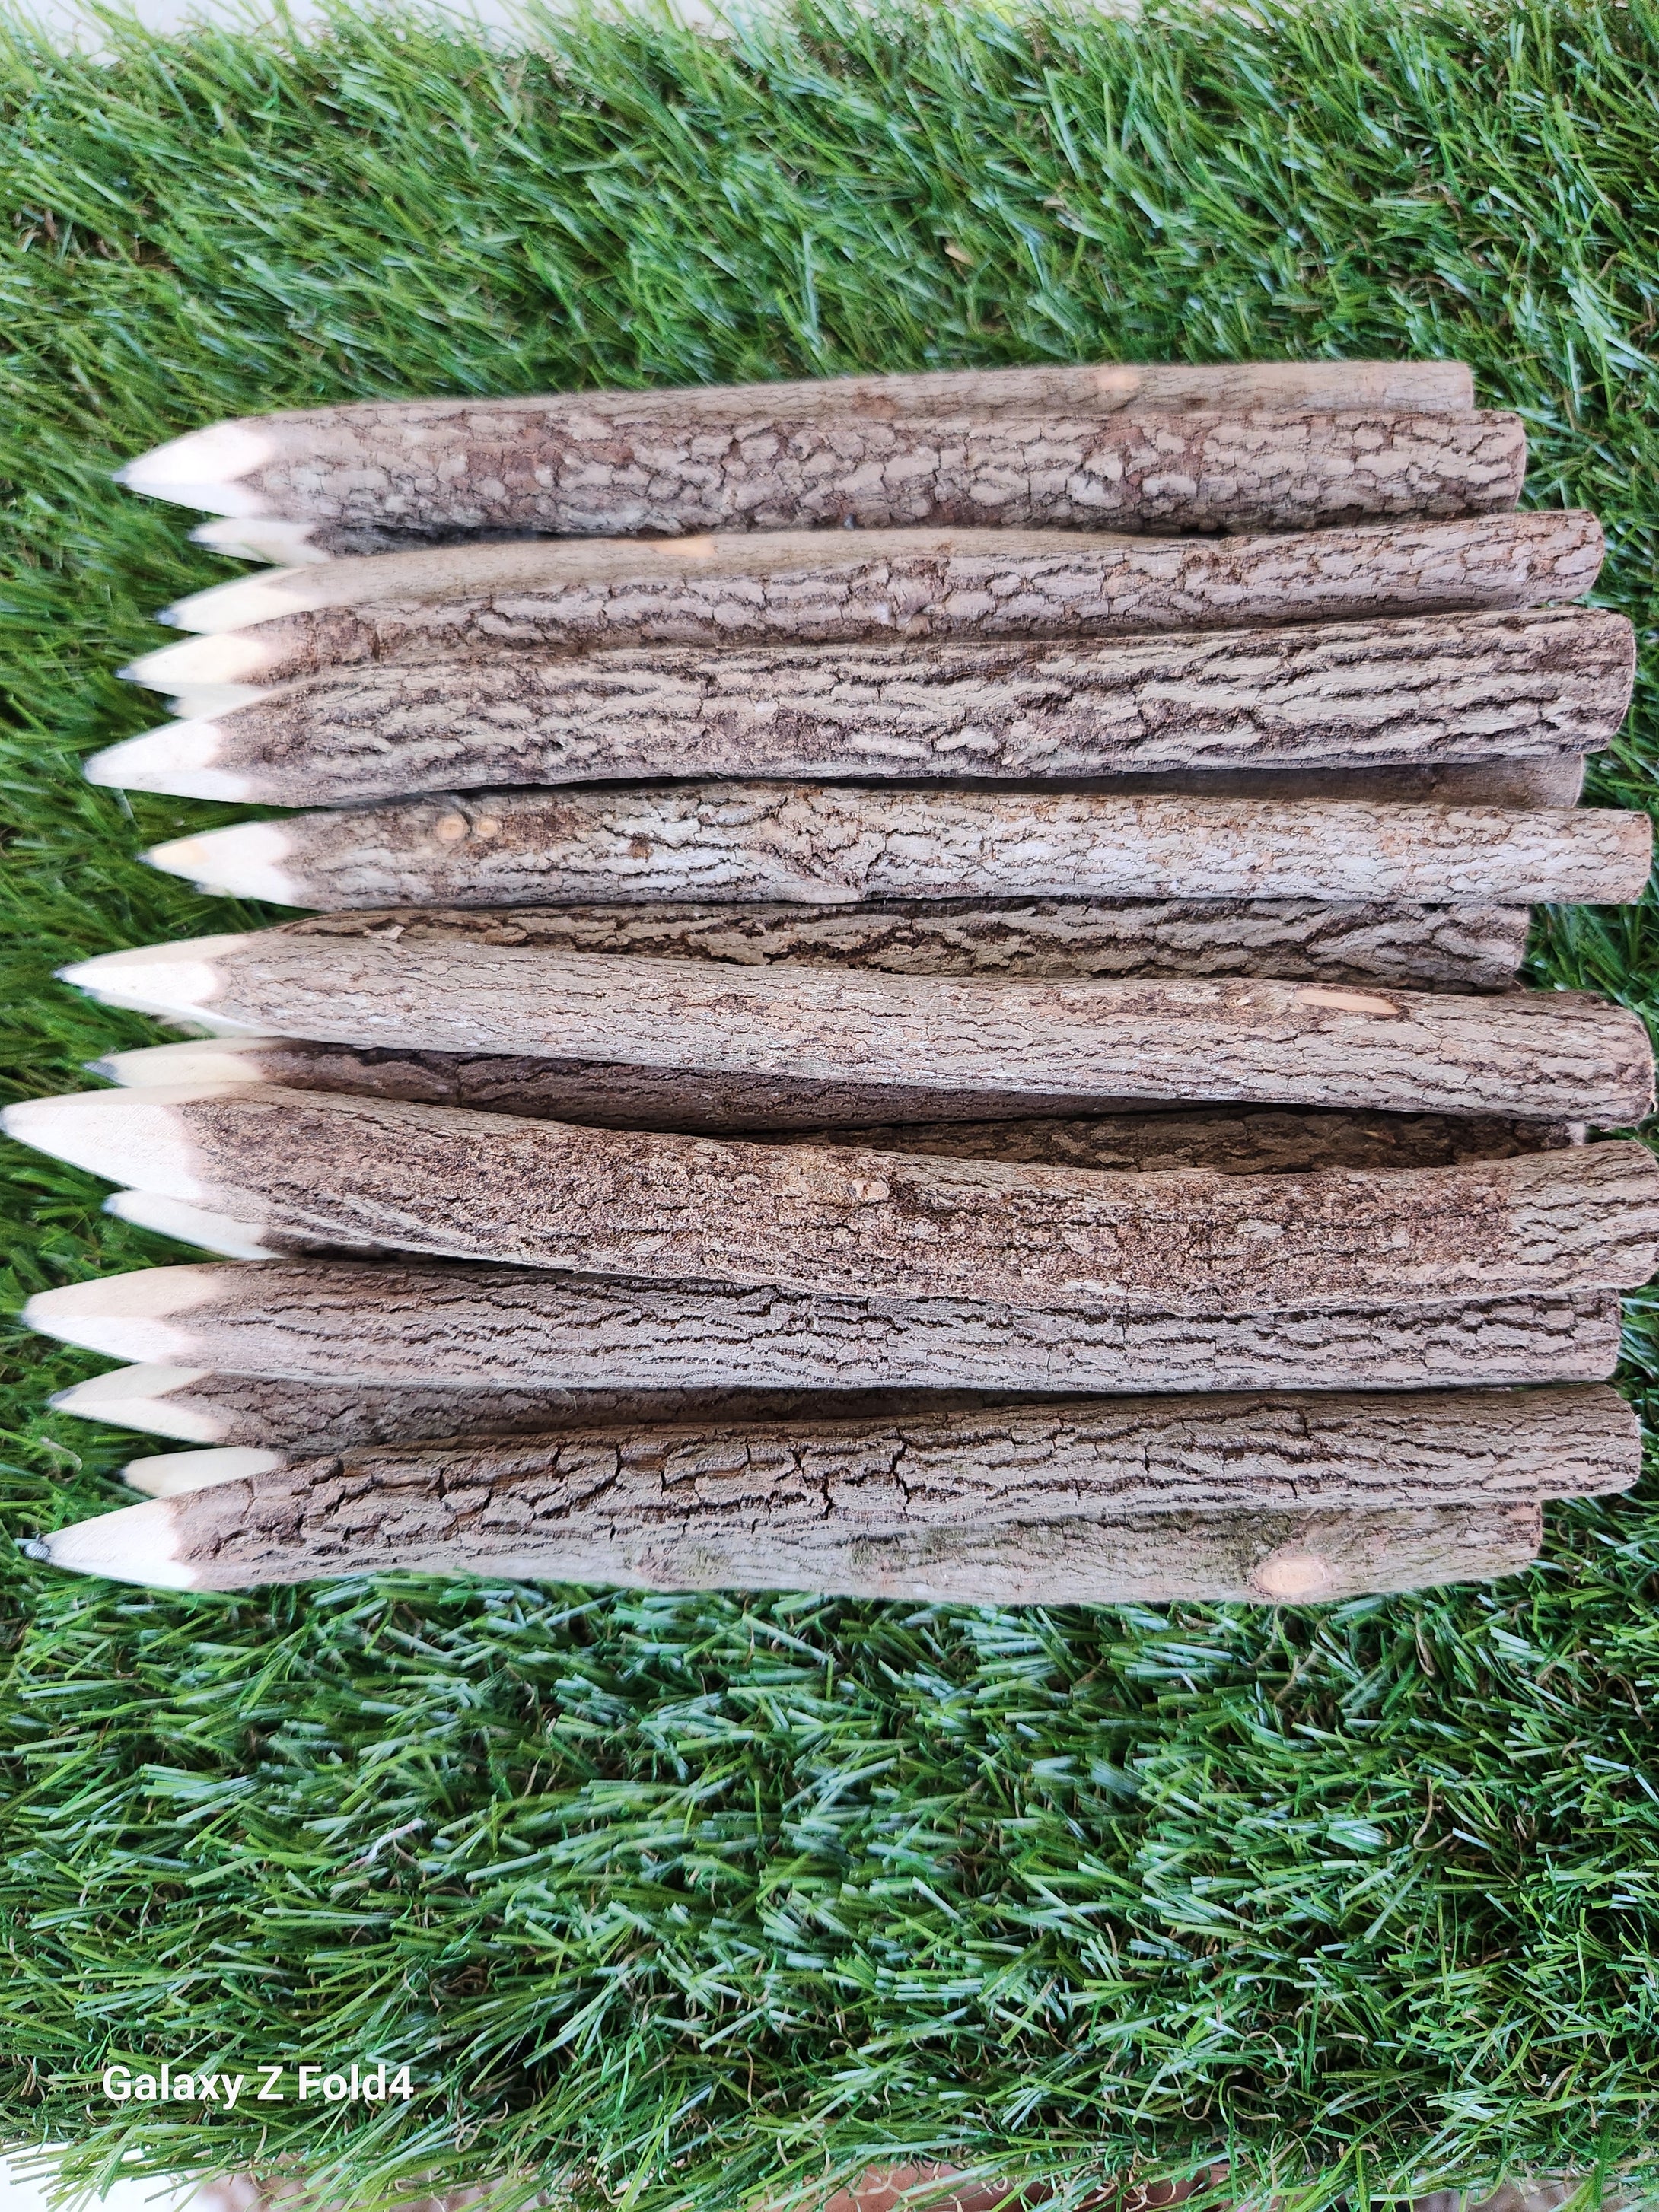 Black Pencils Wood- 7 Inchs Tree Bark Wooden Favors in Rustic Twig Pencils Unique Gifts Camping Lumberjack Decorations Party Supplies Novelty Gifts as Natural Pencil